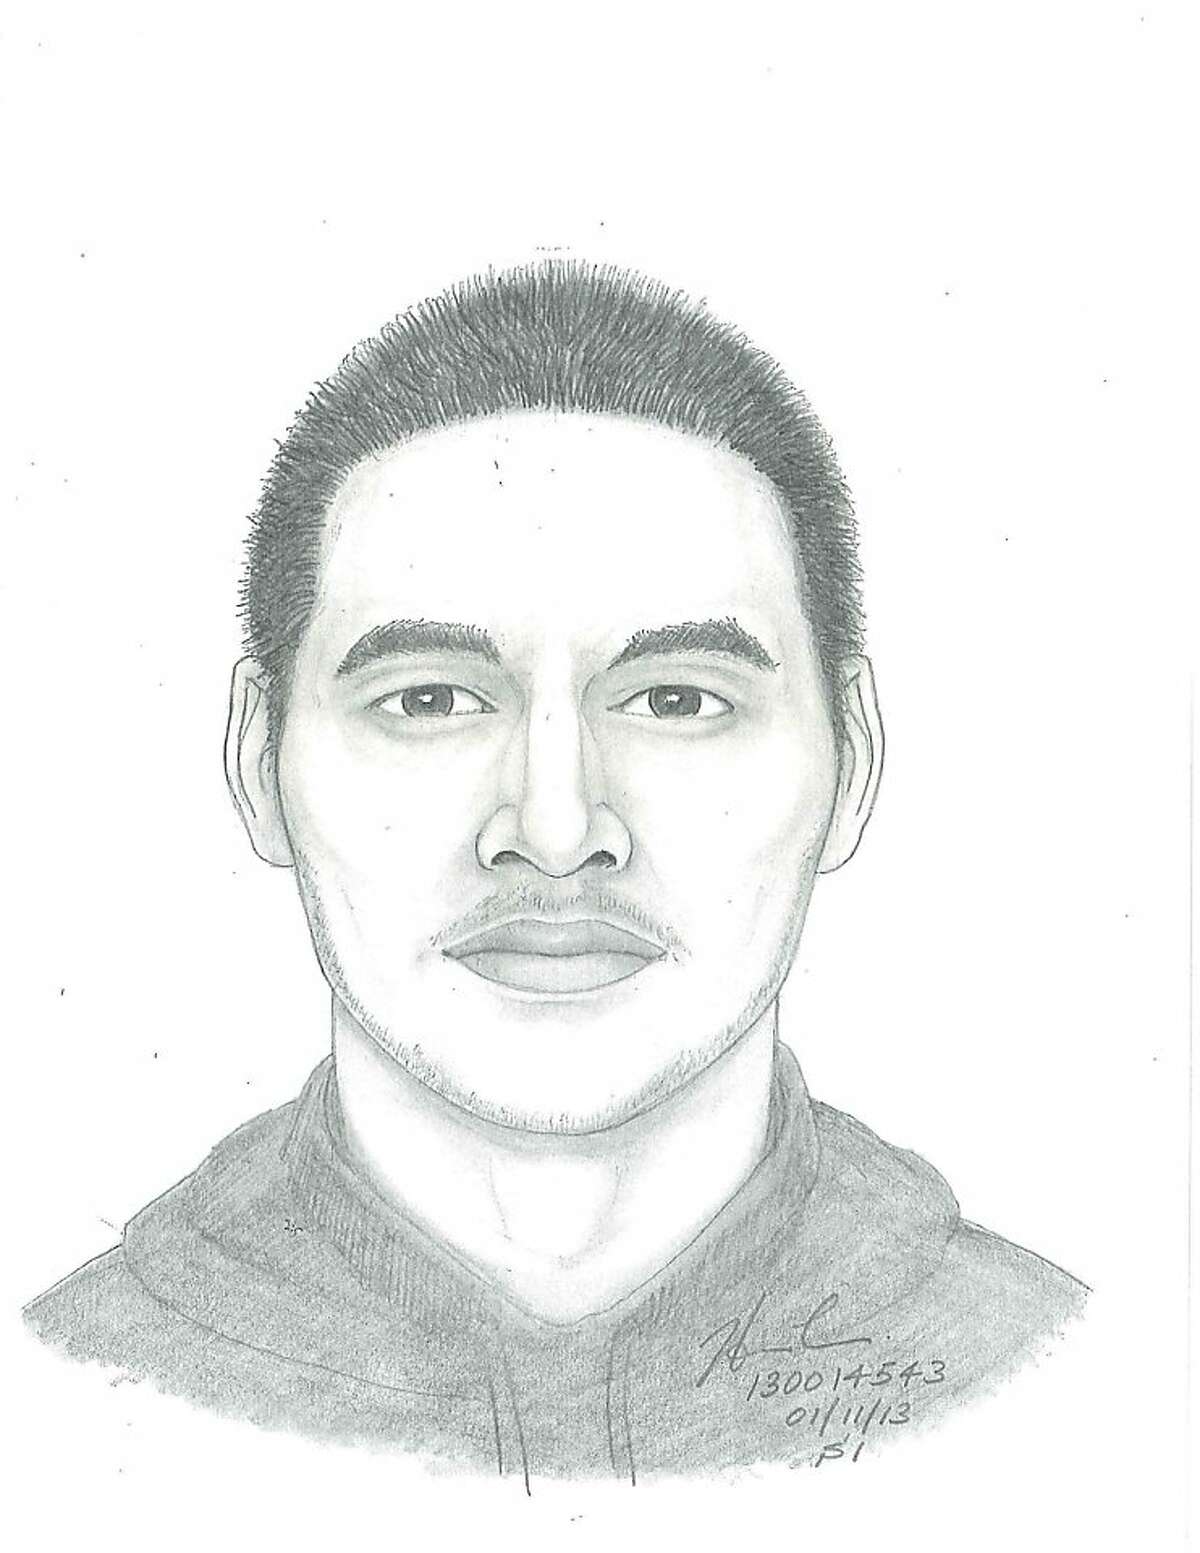 The man depicted in this police sketch attempted to sexually assault a woman in San Francisco's Mission District on Jan. 6, 2013.